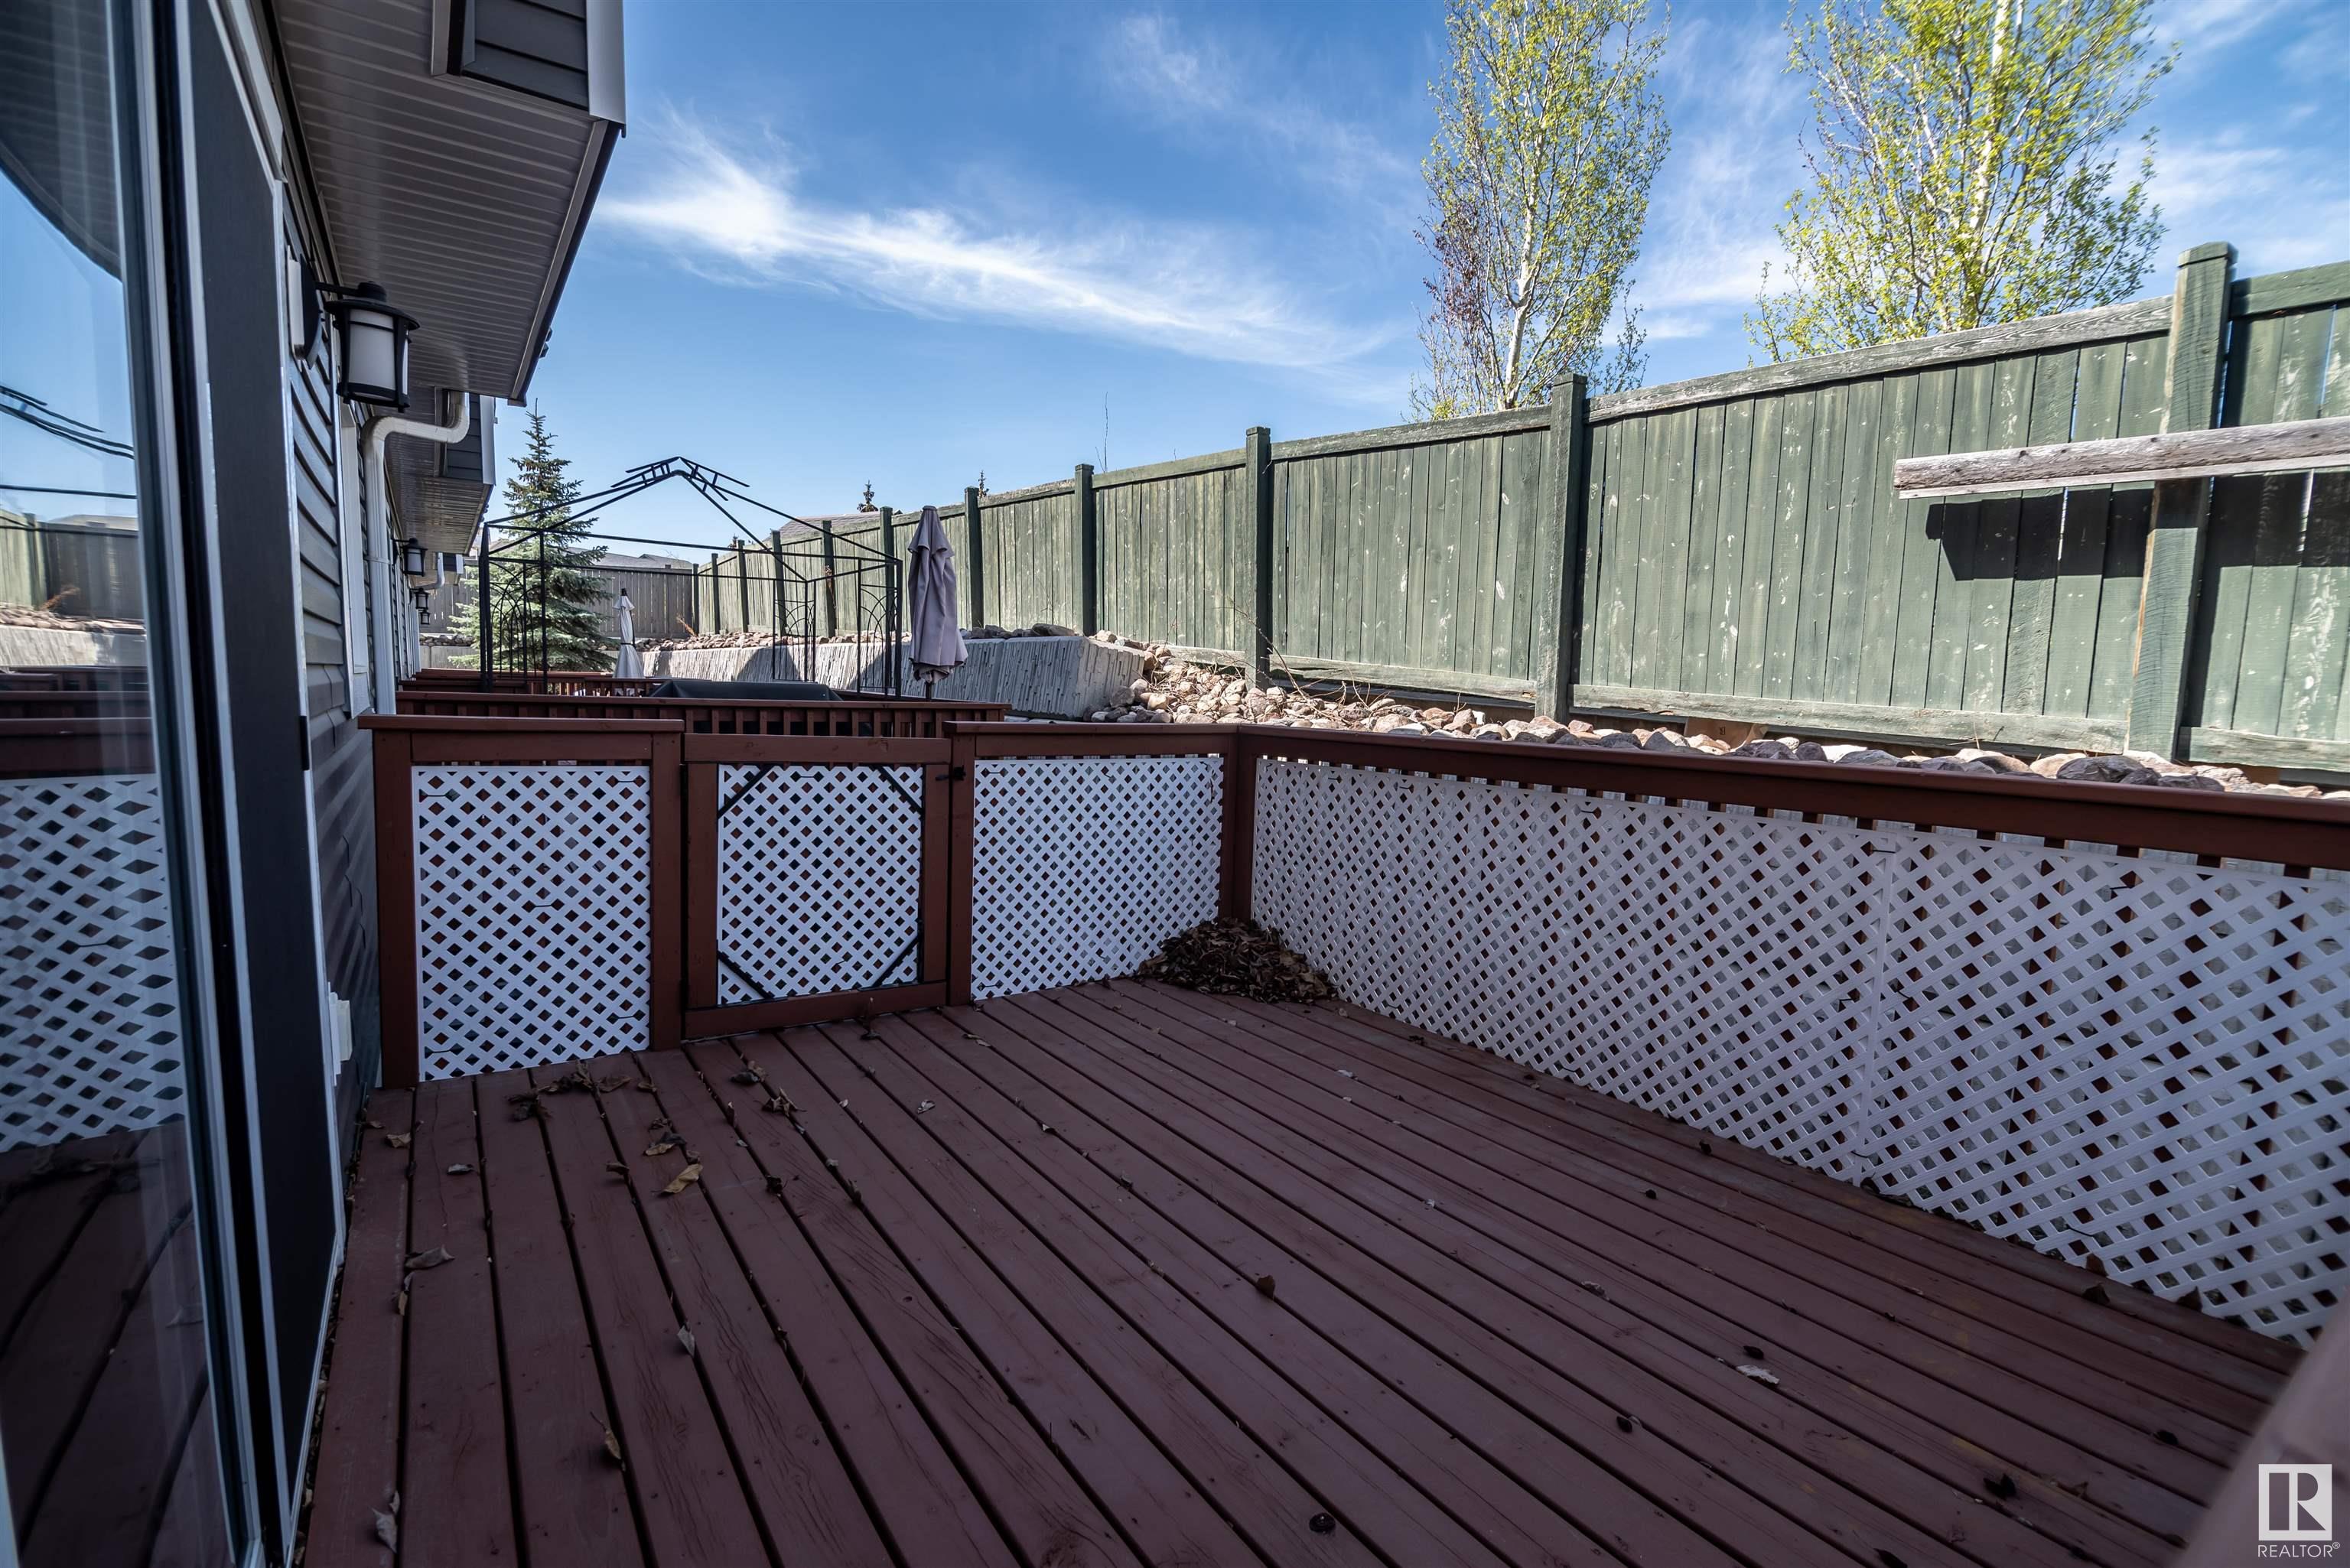      #12 500 GROVE DR , Spruce Grove,  ,T7X 0P6 ;  Listing Number: MLS E4332411